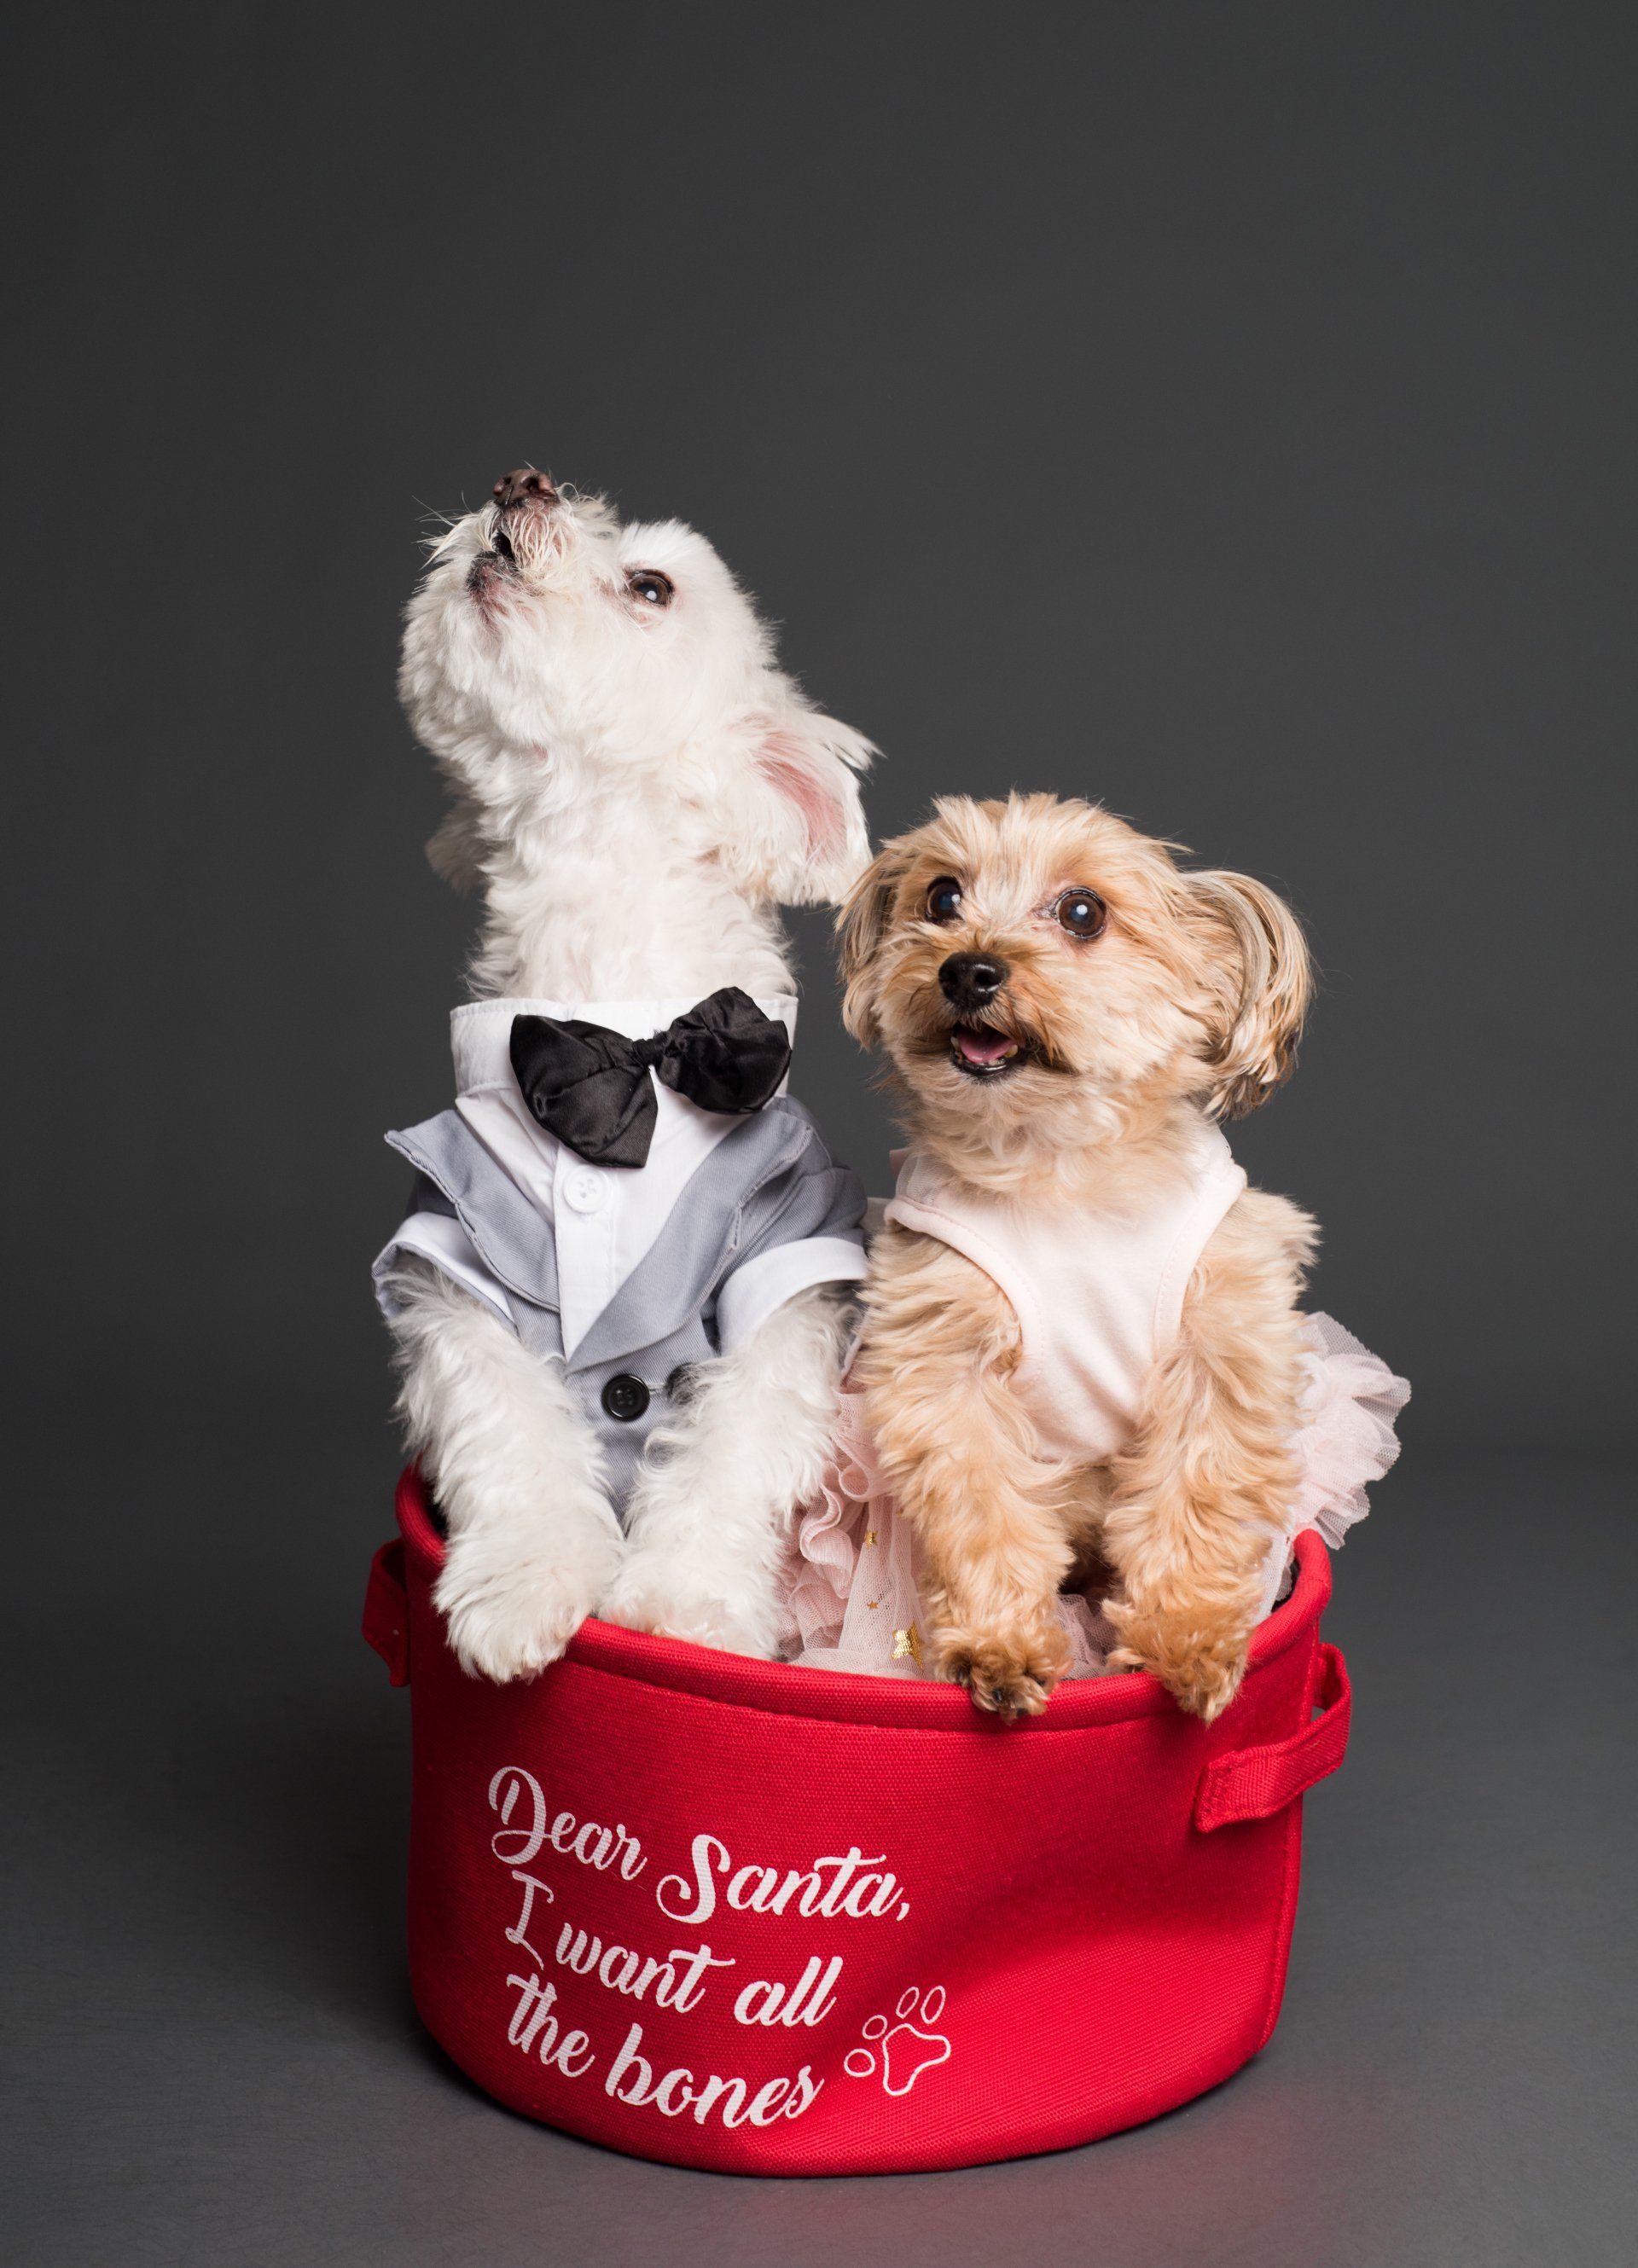 Two small dogs wearing tuxedos and bow ties are sitting in a red basket.